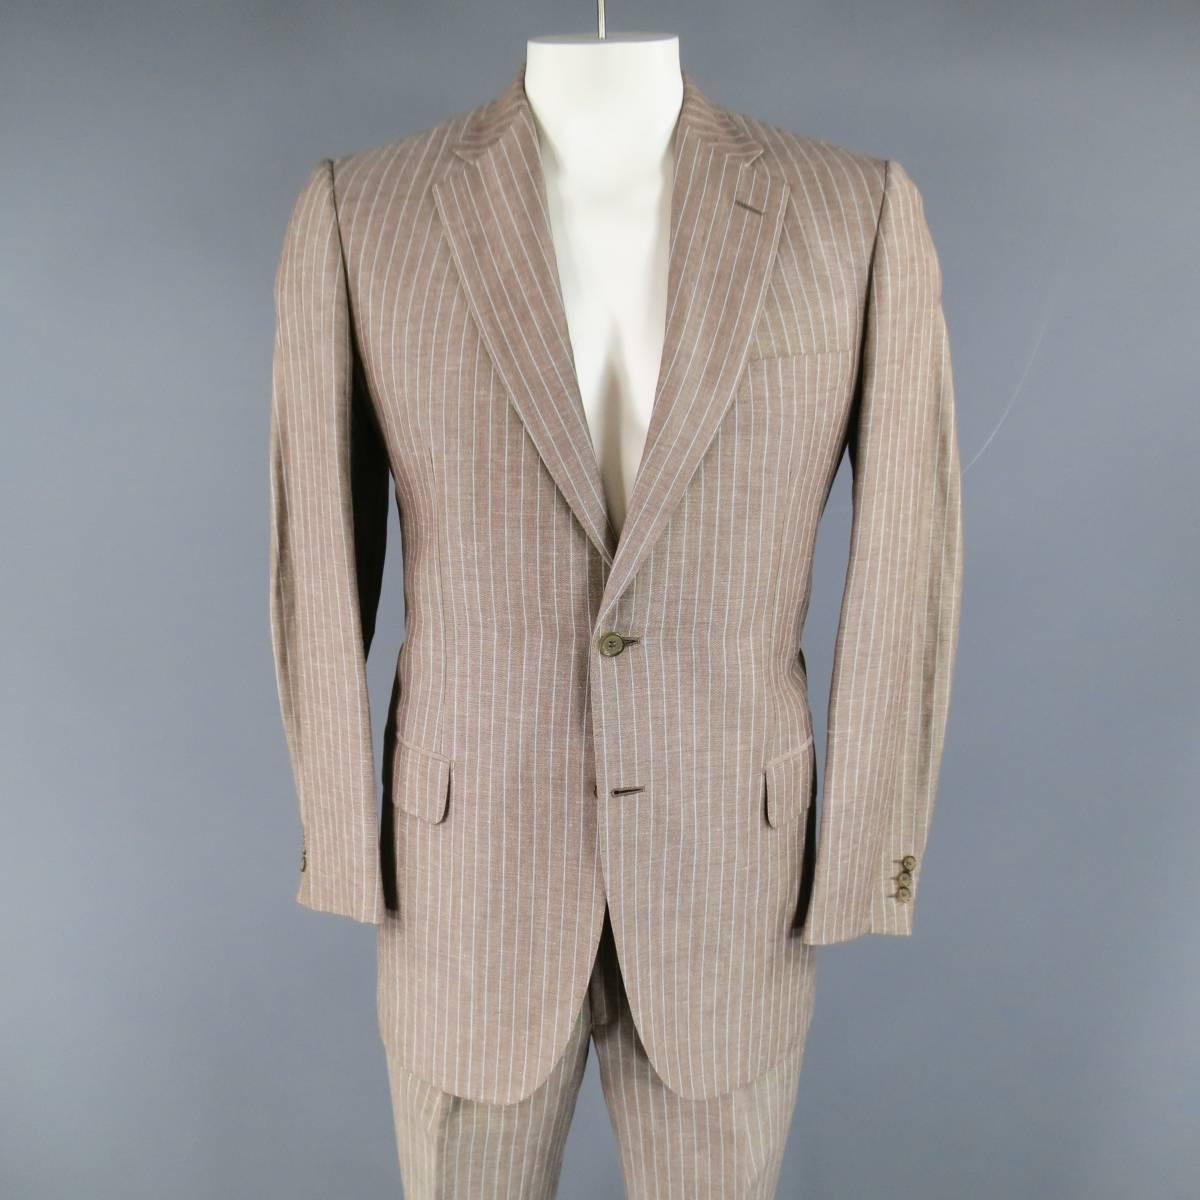 Classic Men's BRIONI for WILKES BASHFORD two piece suit in light taupe brown pinstripe wool / linen includes a notch lapel, two button jacket with double flap pockets, and double vented back with matching pleated, cuffed hem trousers. Made in